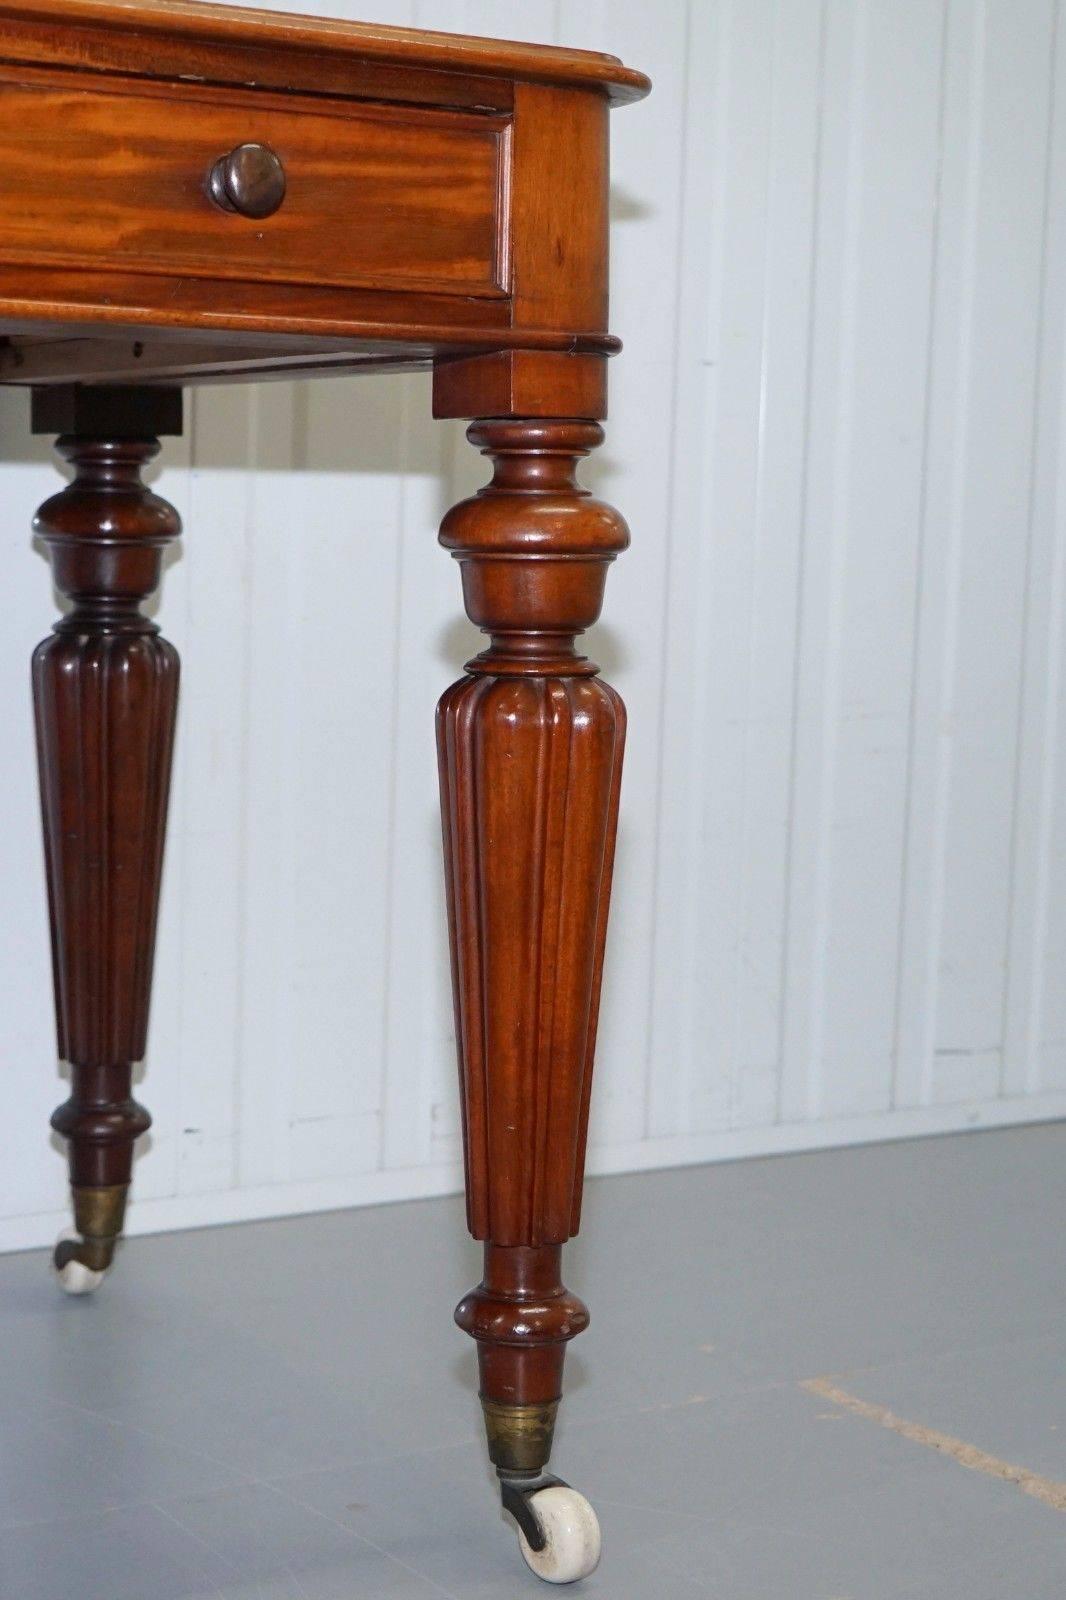 Mid-19th Century Lovely William IV Mahogany Dressing Table with Gillows Inspired Legs, circa 1830